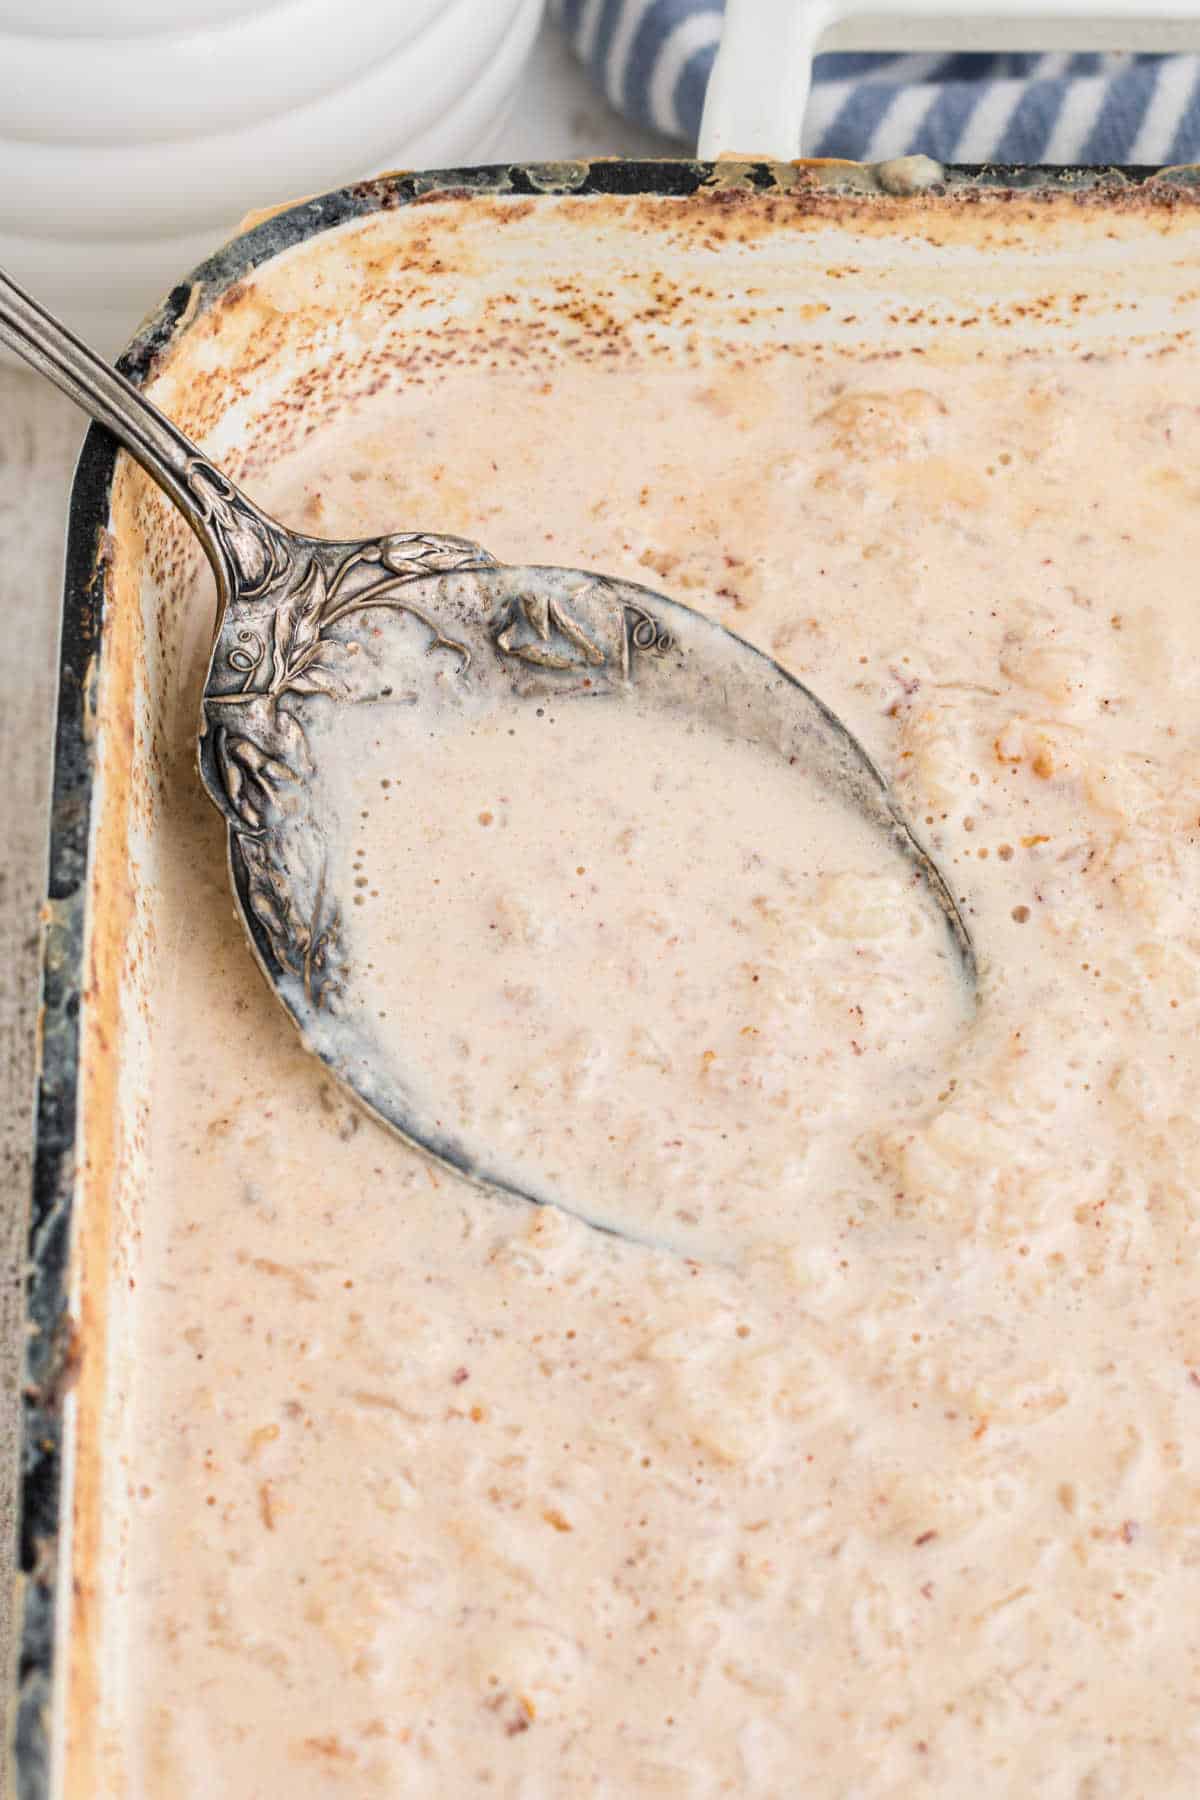 Large pan of rice pudding with evaporated milk, with a spoon digging in.